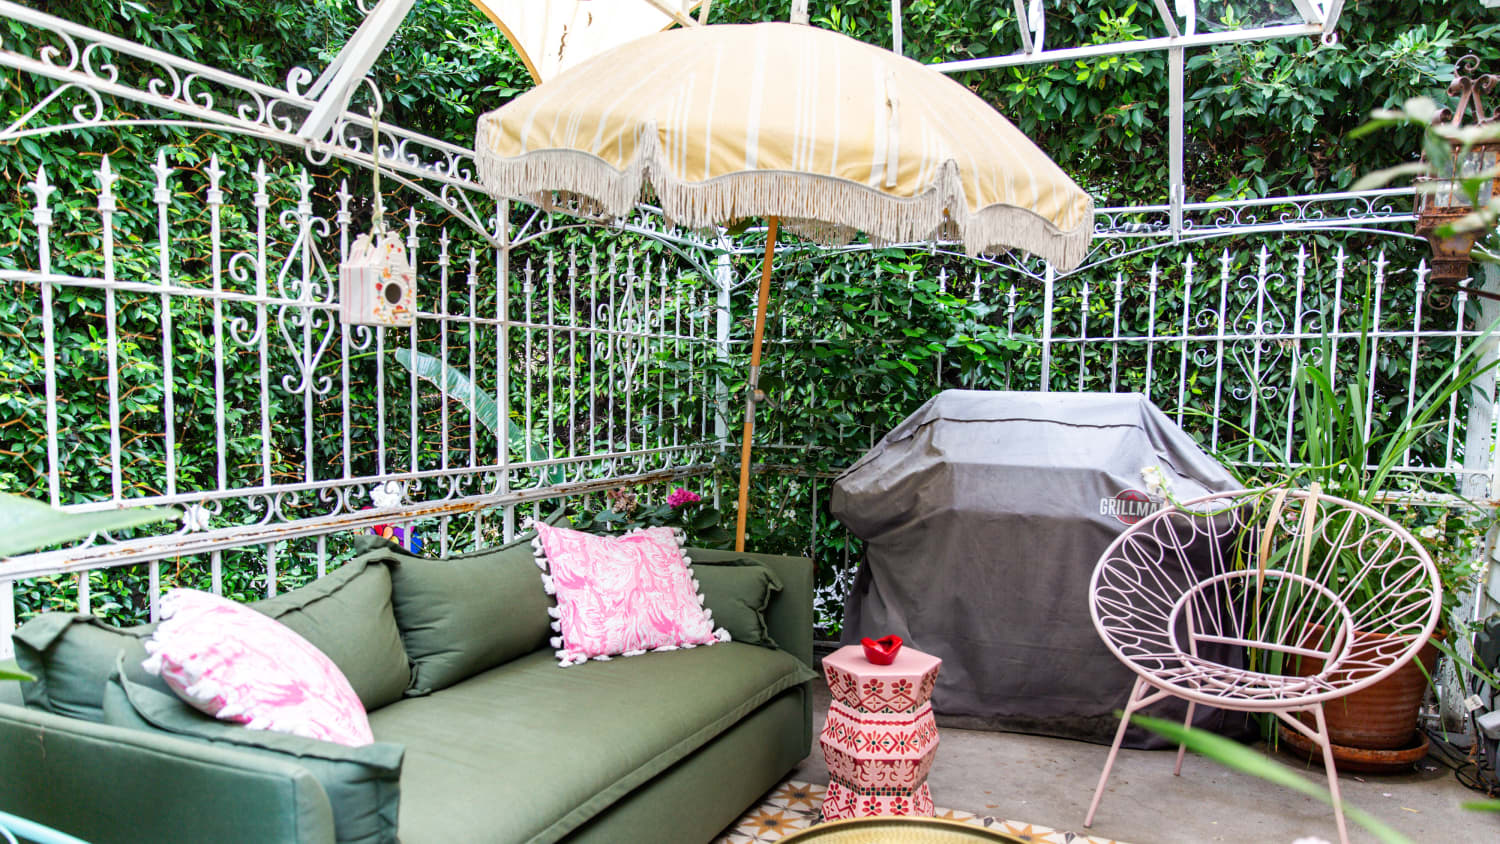 This Patio Umbrella Stand DIY Looks So Gorgeous | Apartment Therapy